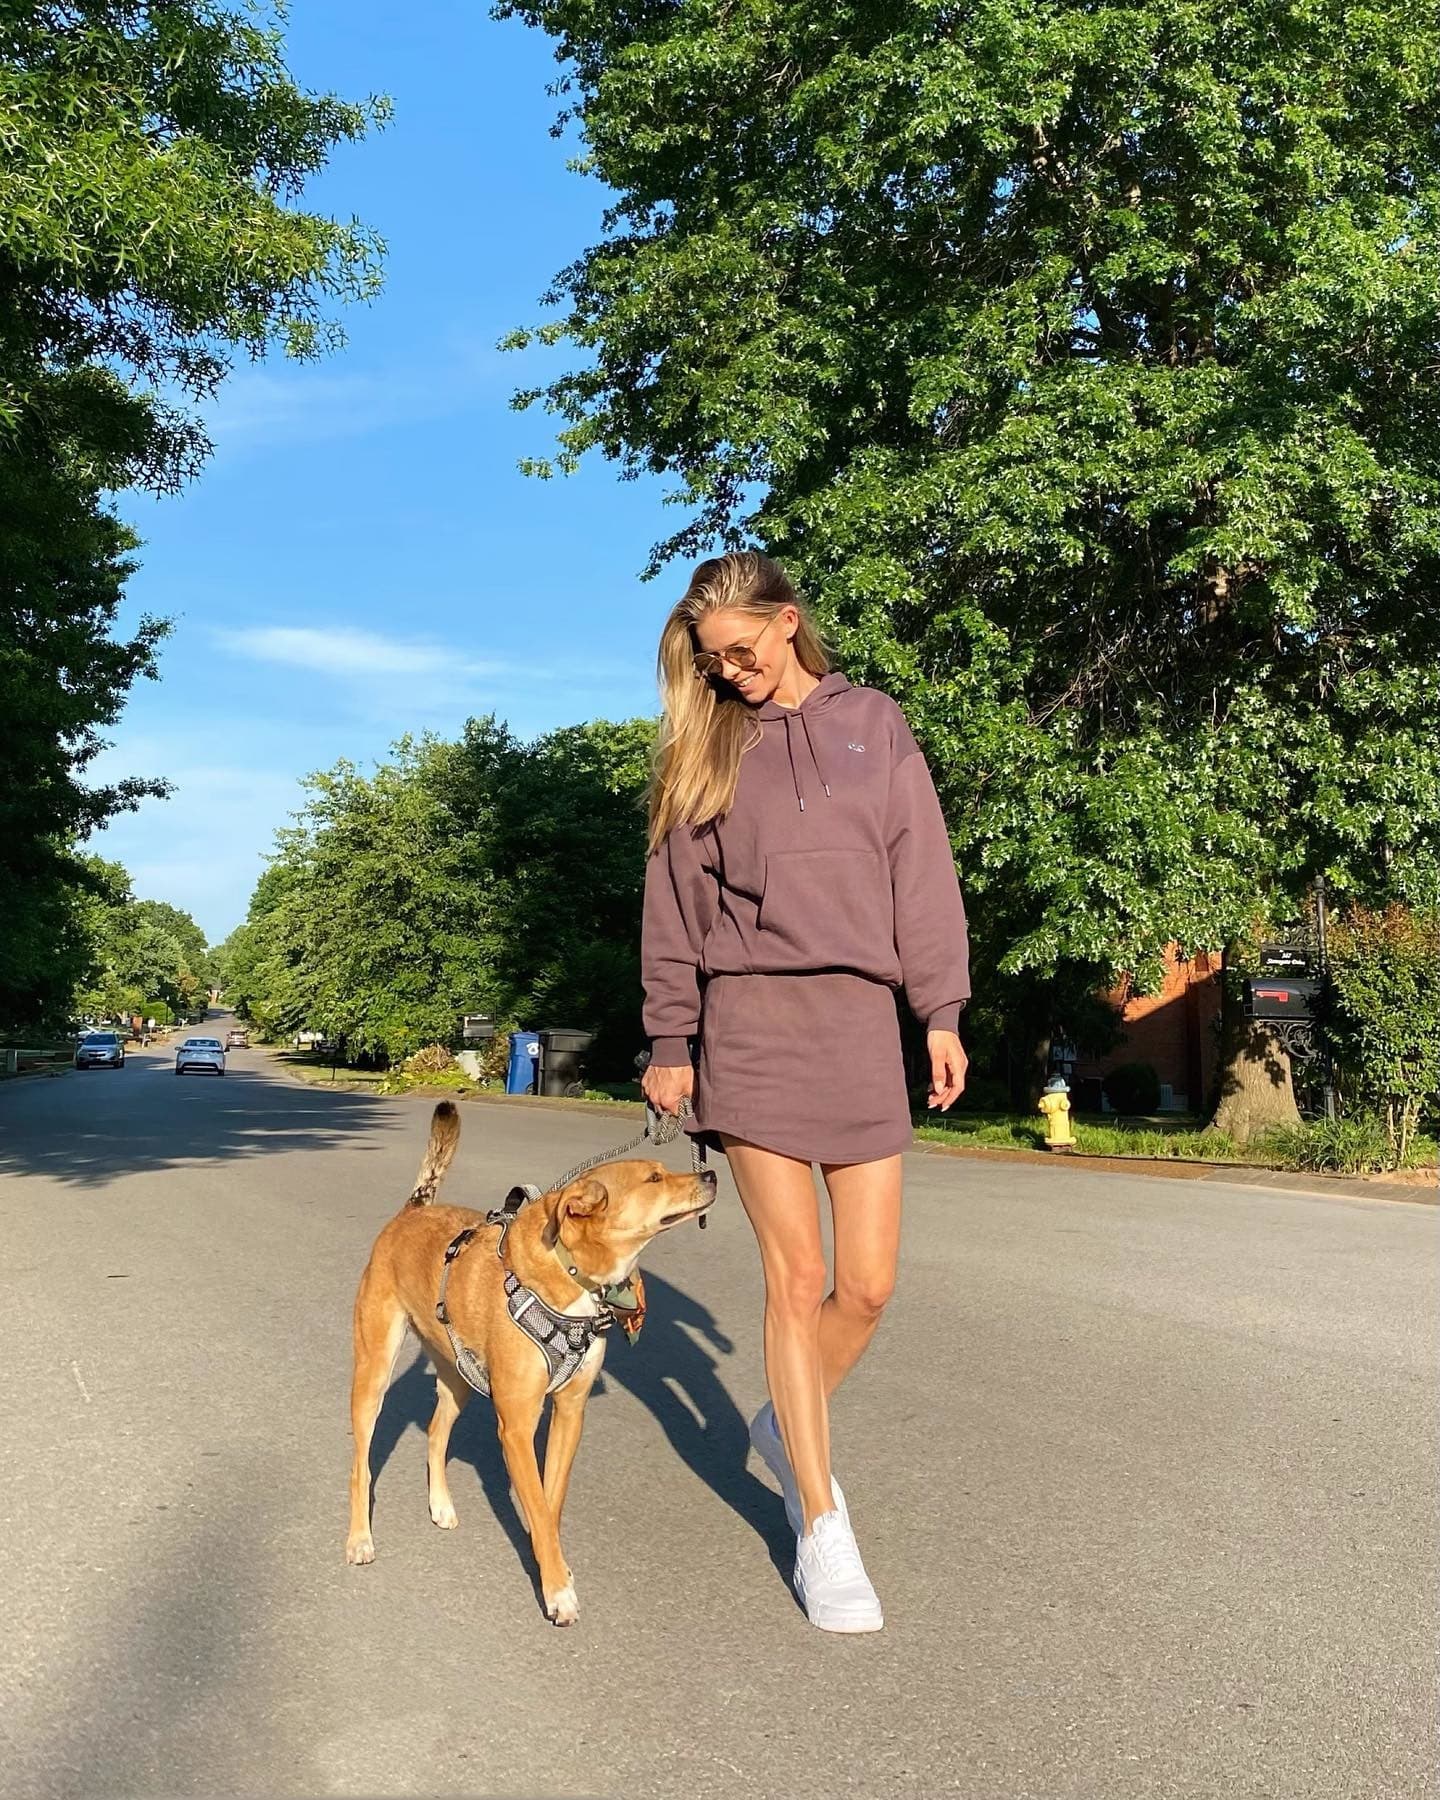 @danielleknudson1 wearing a brown sweat skirt with a matching hooded sweatshirt while walking her dog in a street lined with large green trees.